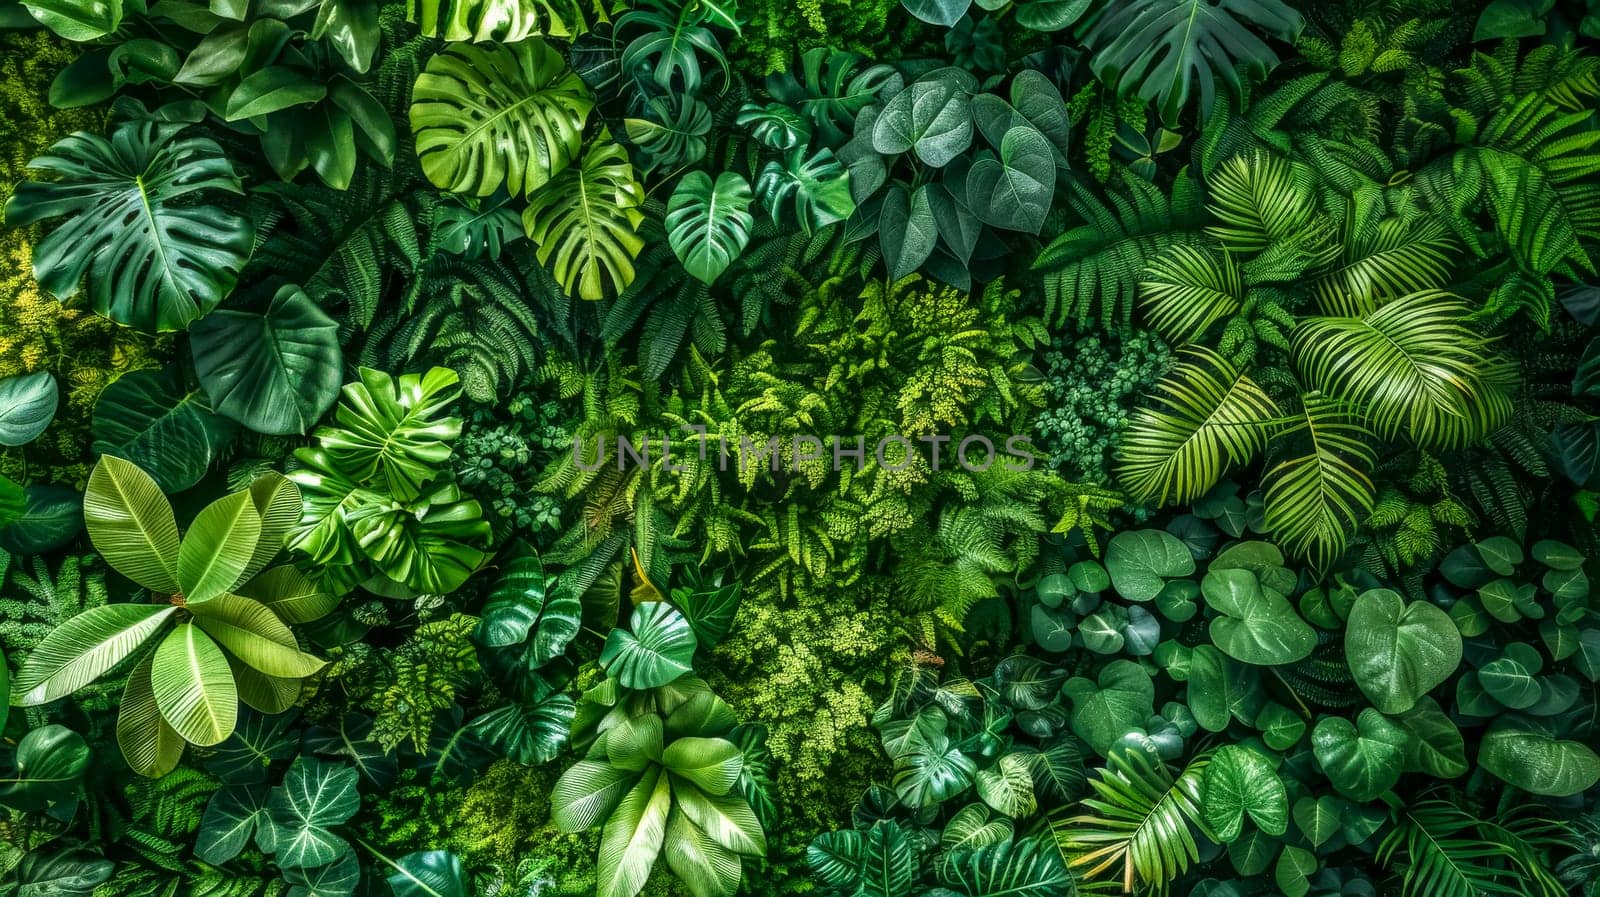 Lush greenery of tropical plant wall by Edophoto